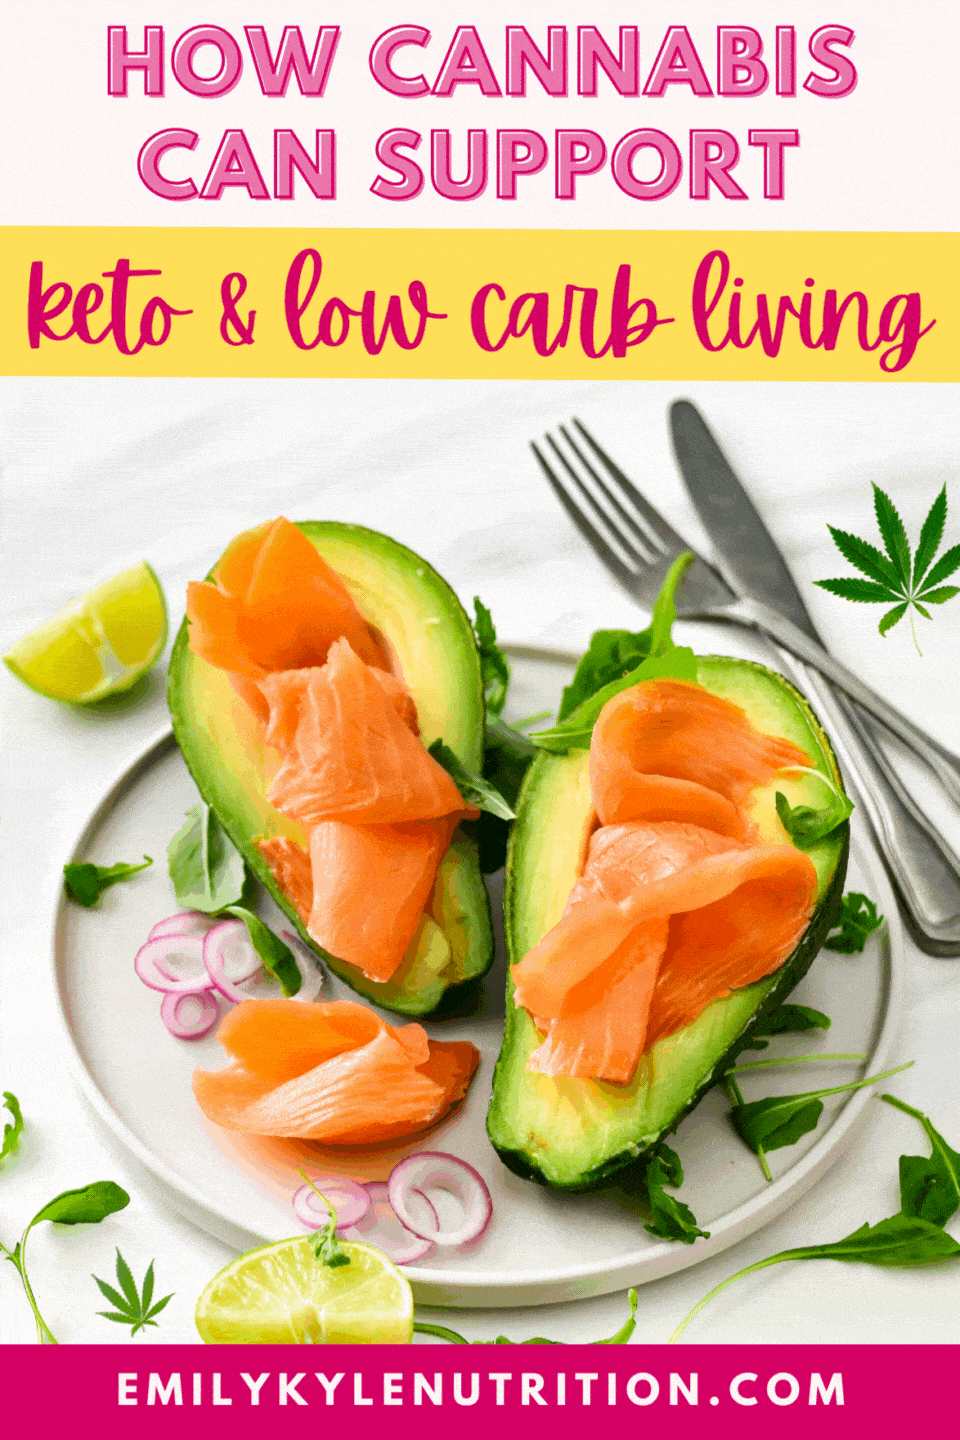 A picture of avocado with salmon and a cannabis leaf.